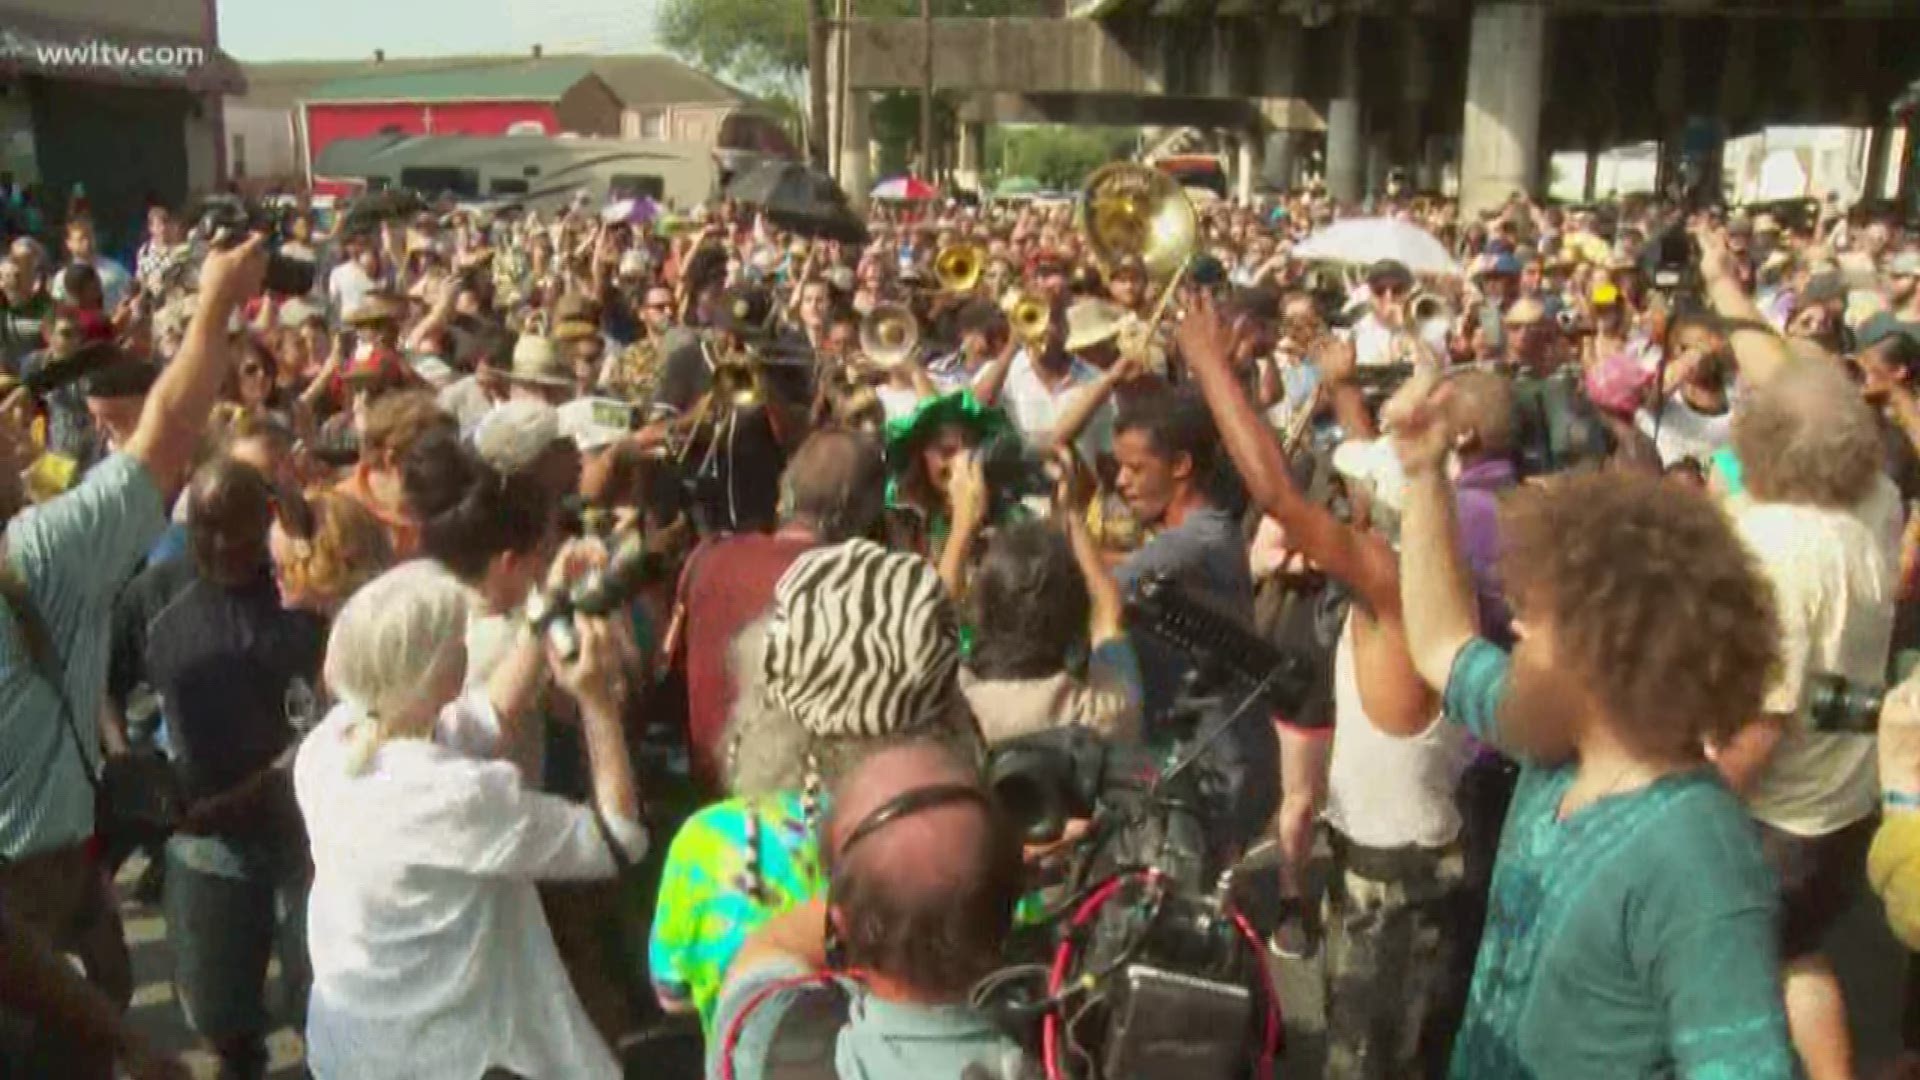 In the heart of Treme, with the temperature feeling close to 100 degrees, the trumpets played, the people danced and thousands marched in the streets -- honoring the life of New Orleans musician and icon Dr. John.